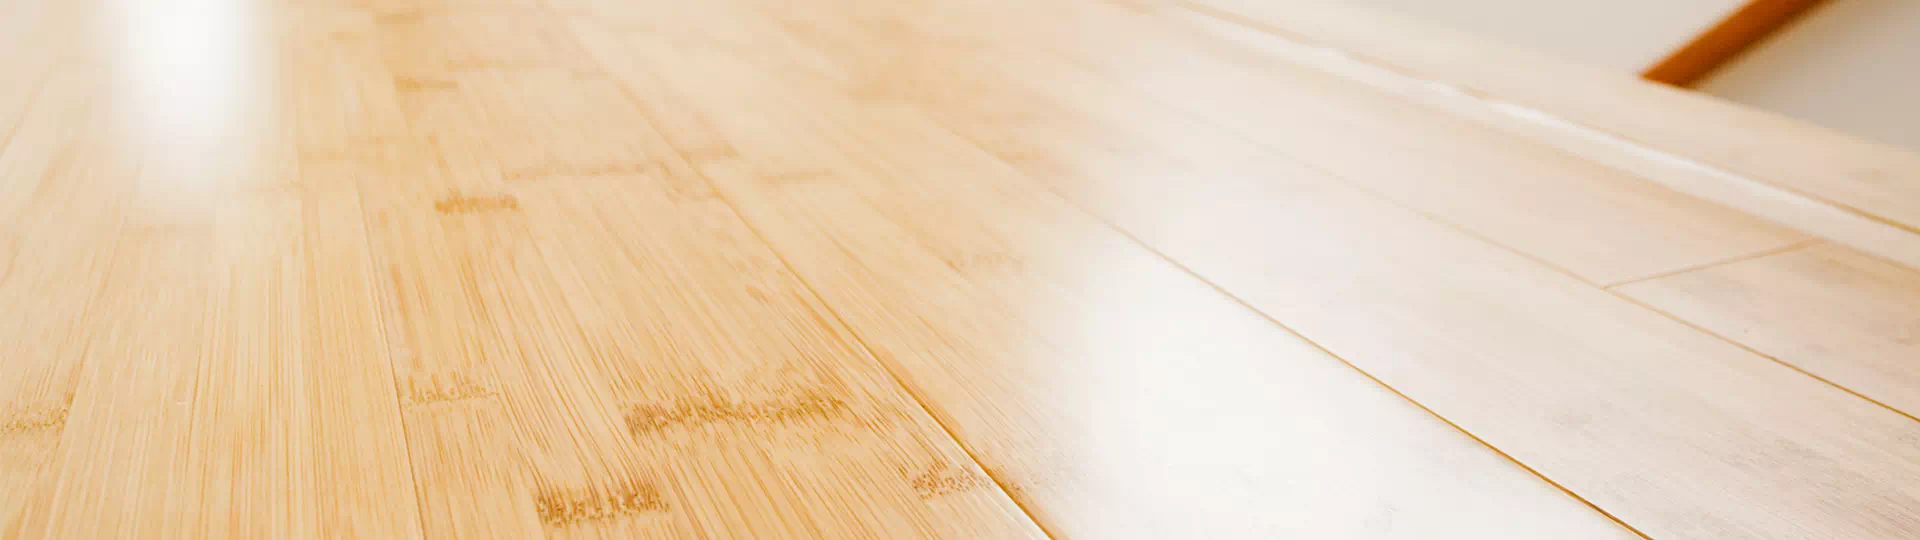 How To Clean Bamboo Floors Simple Green, How Do You Clean Bamboo Hardwood Floors